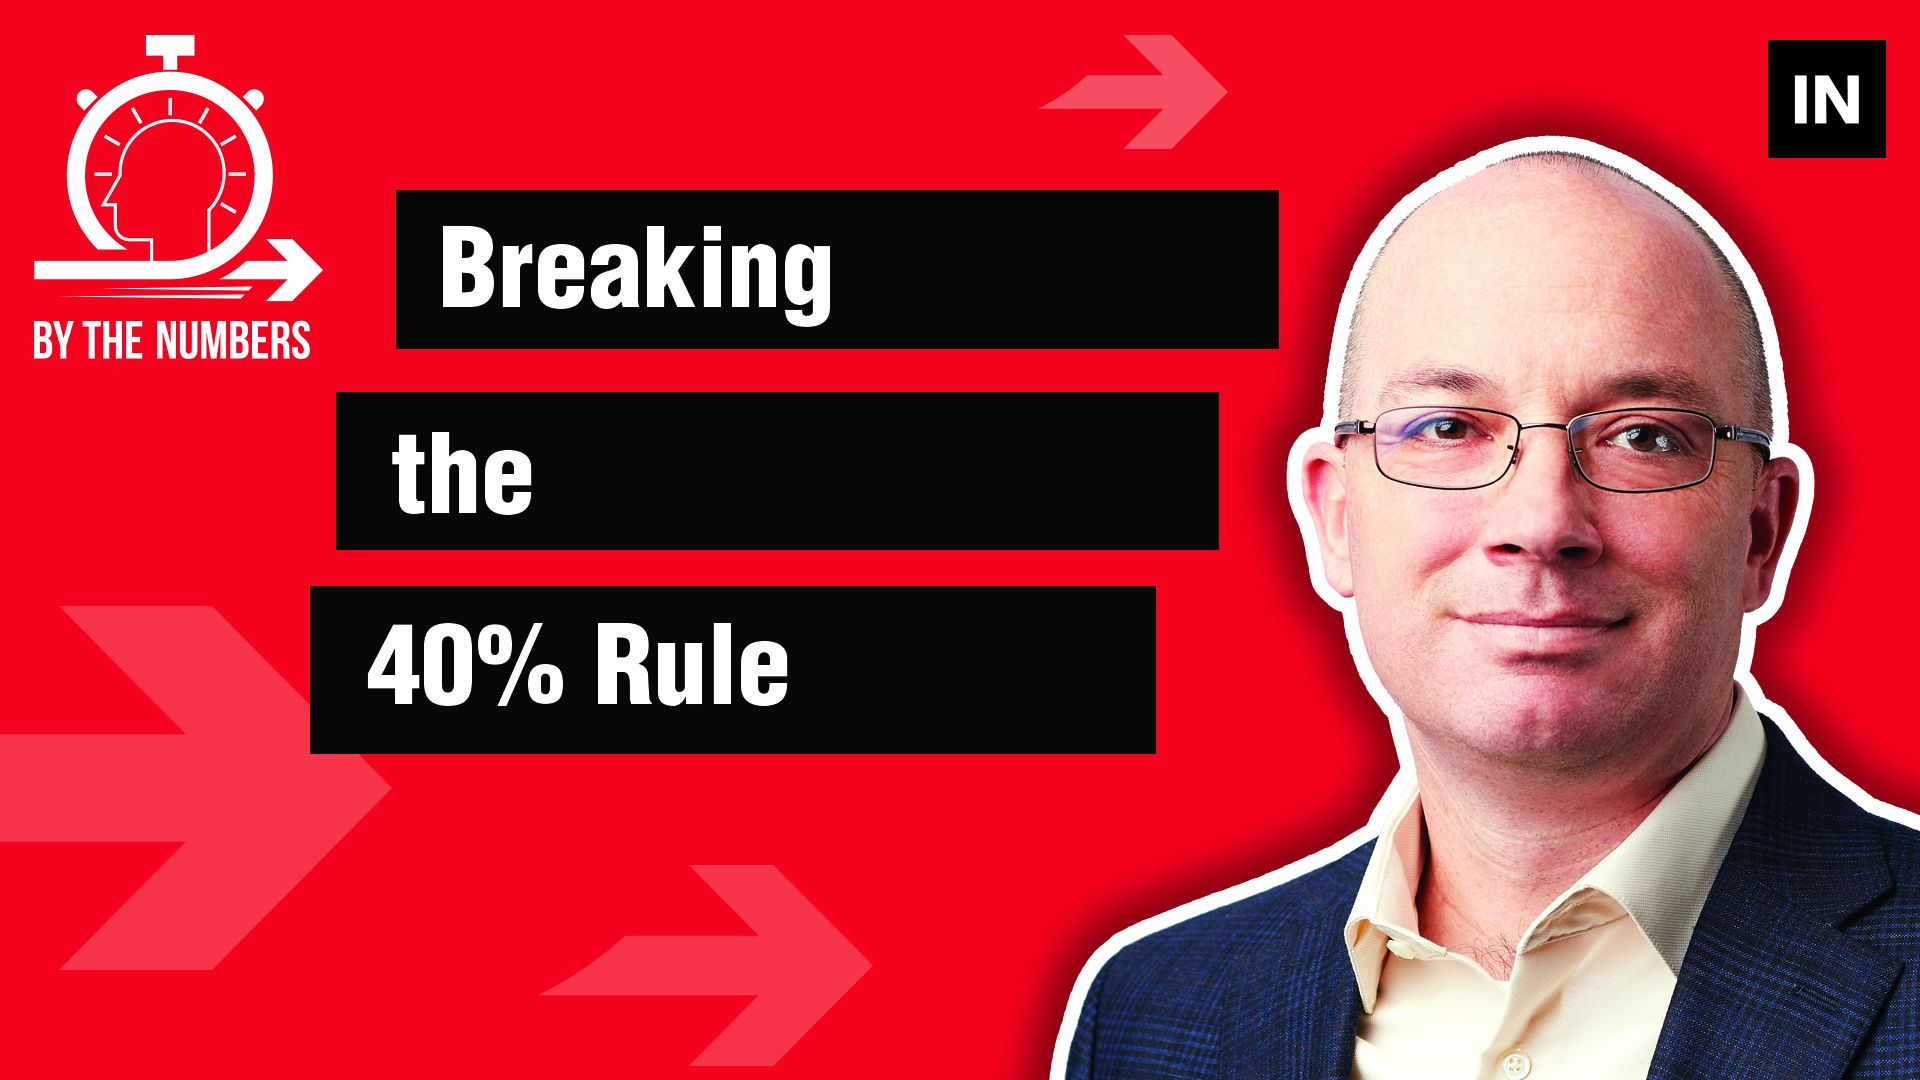 By the Numbers: Breaking the 40% rule